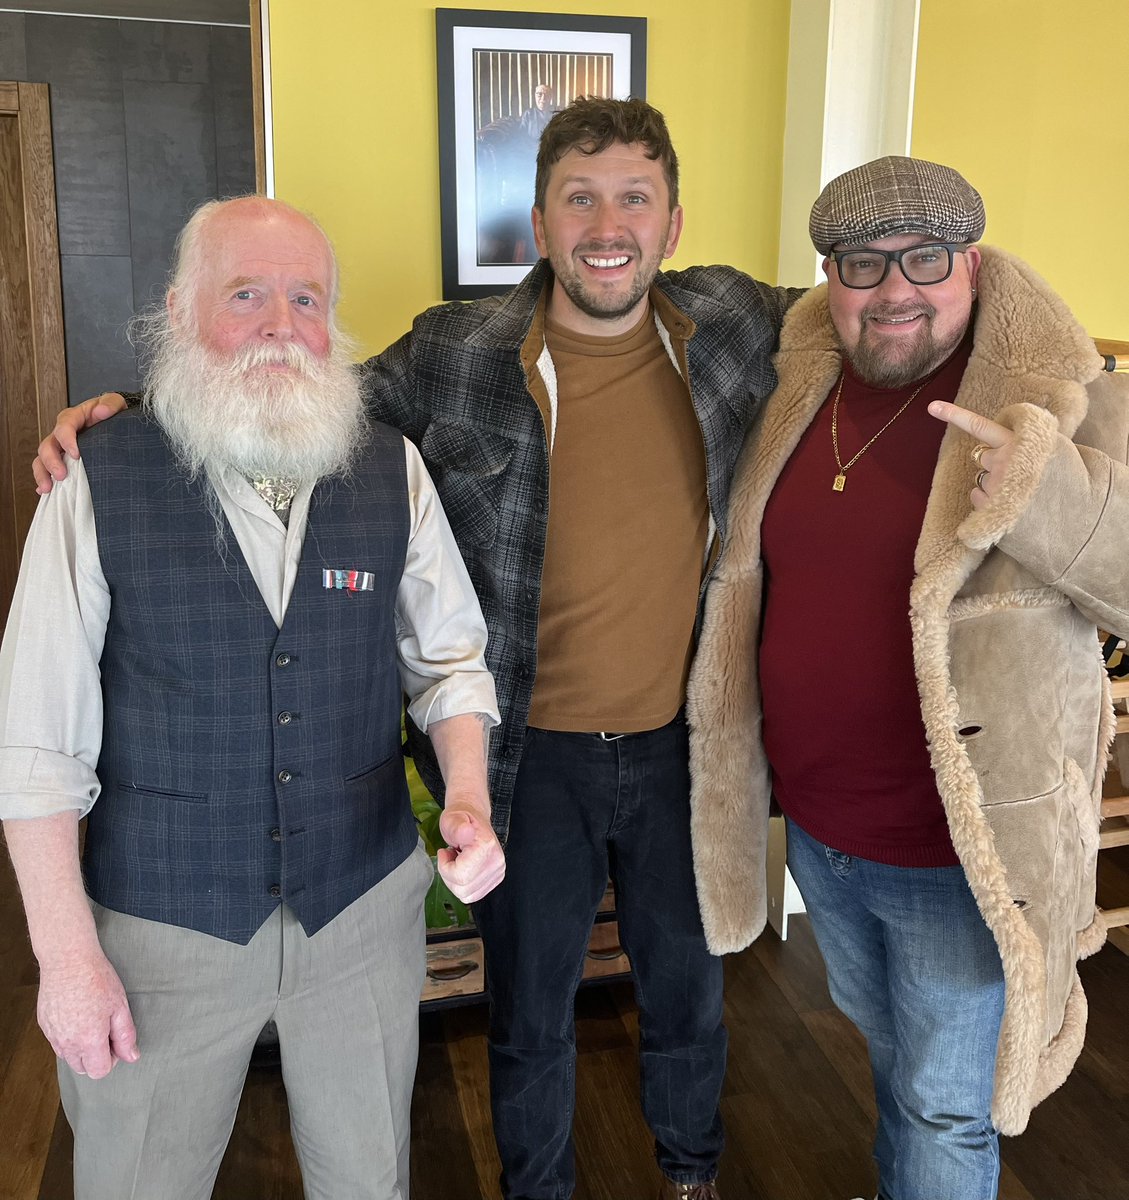 Lovely to meet Del Boy and Uncle Albert today in Weston-super-Mare!